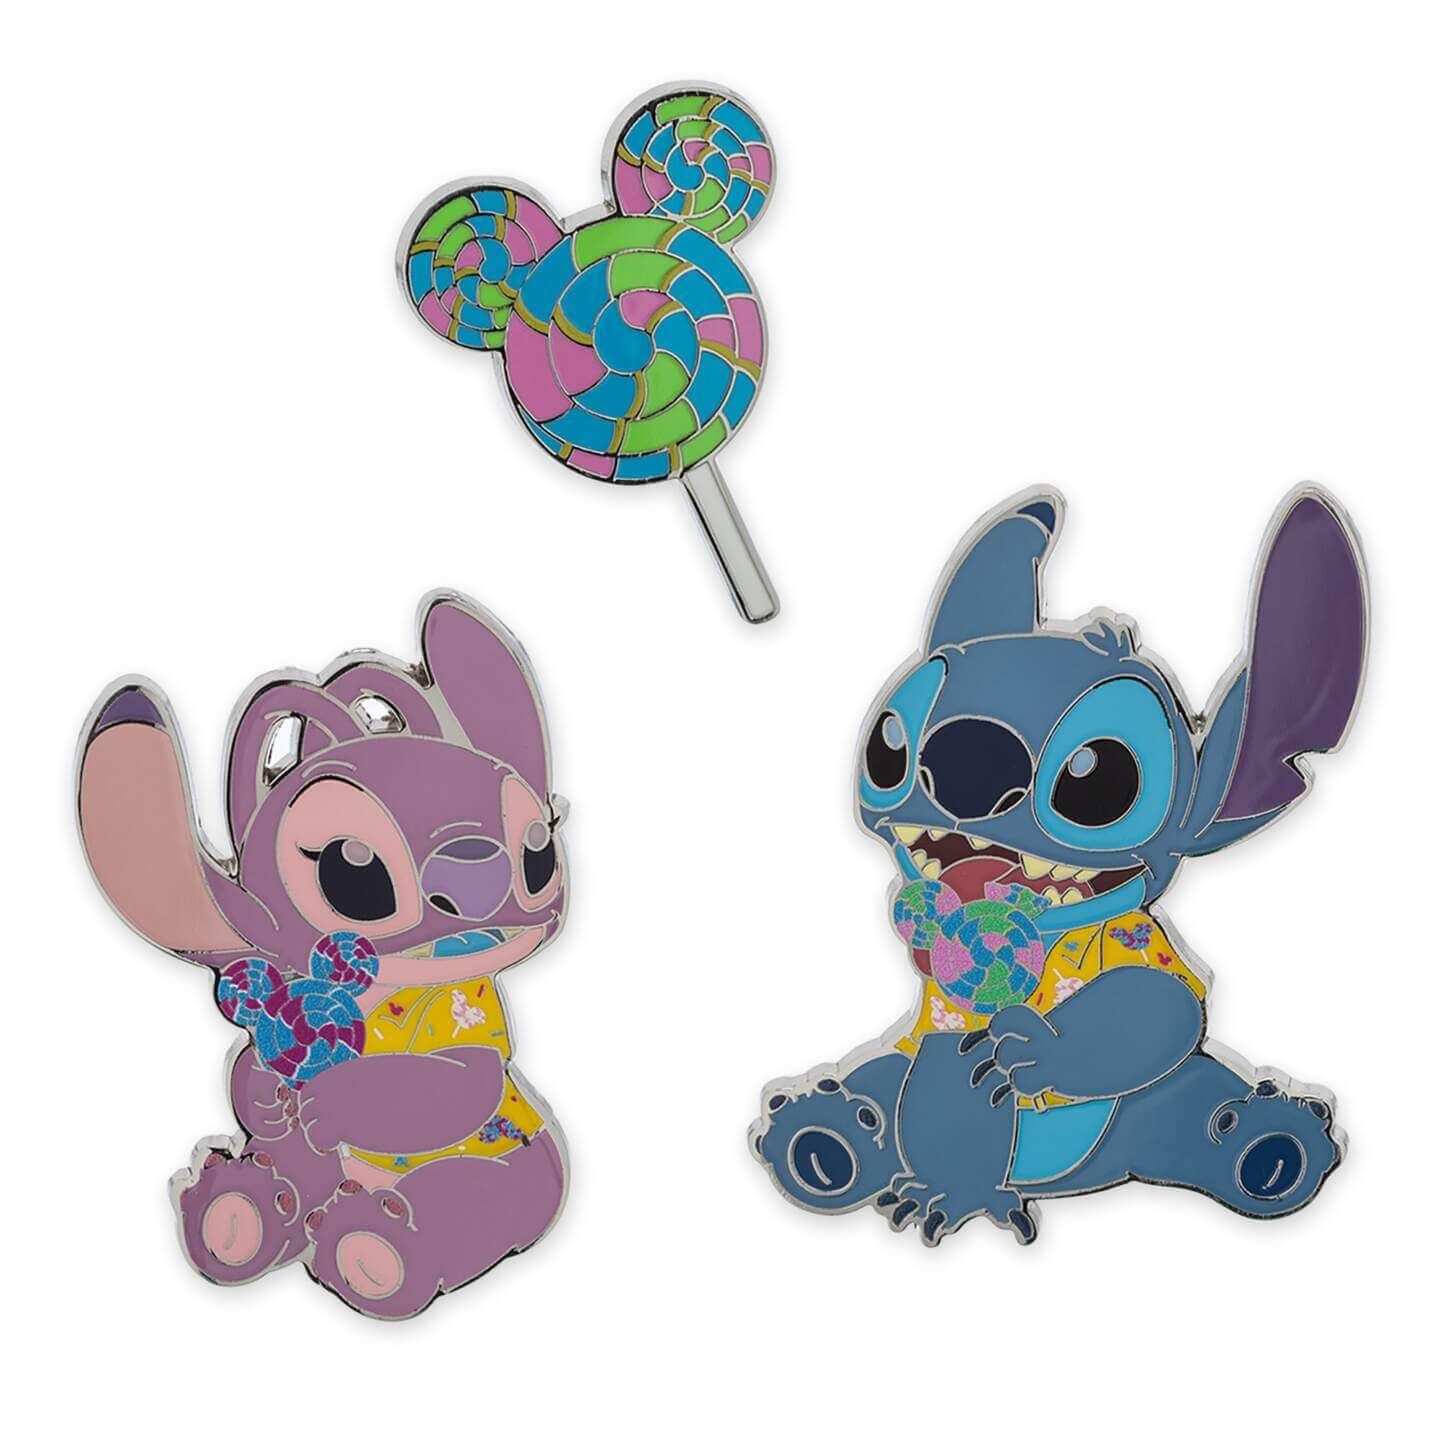 It's time to release our brand new Stitch micro mystery pins. Grab yours  tonight at 4pm pst / 7pm est. #thepinkalamode #sprinklethepin